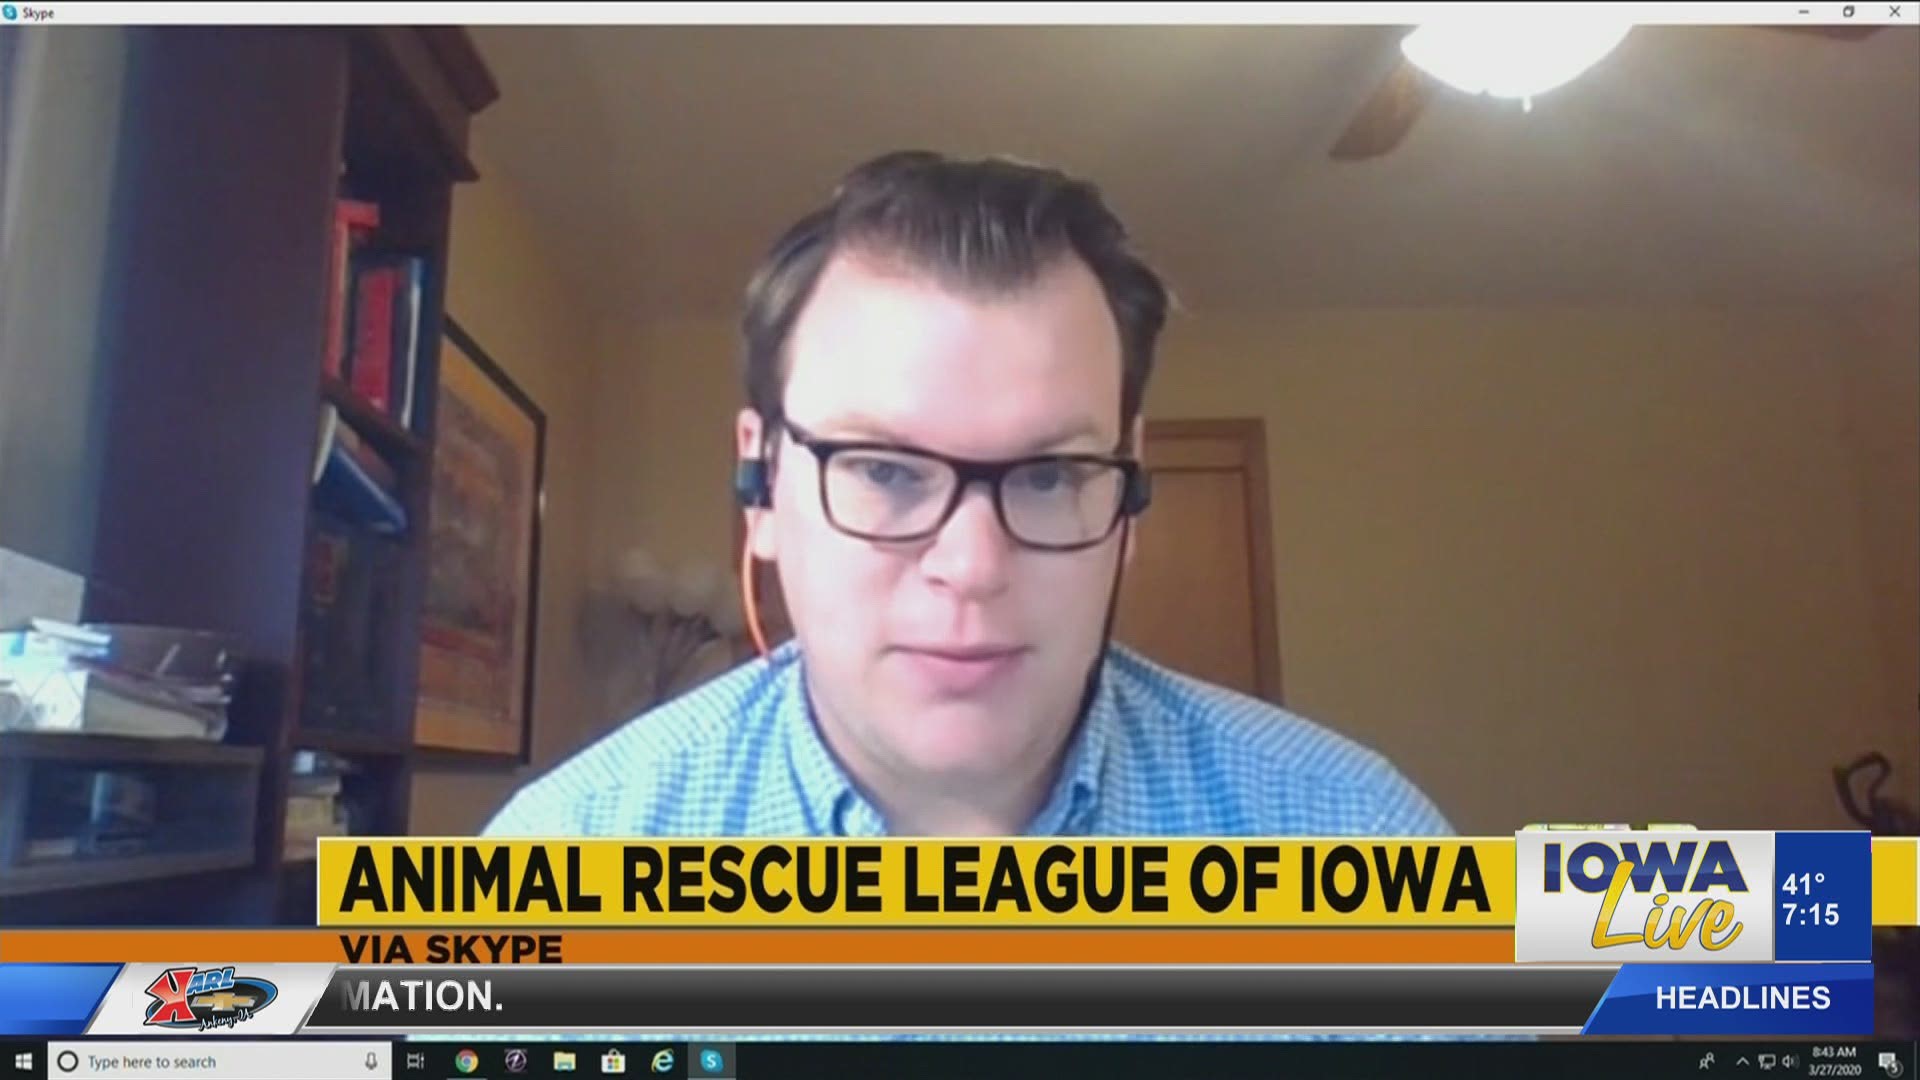 Colin Grace with the ARL gives Lou an update on animal abuse legislation in Iowa.